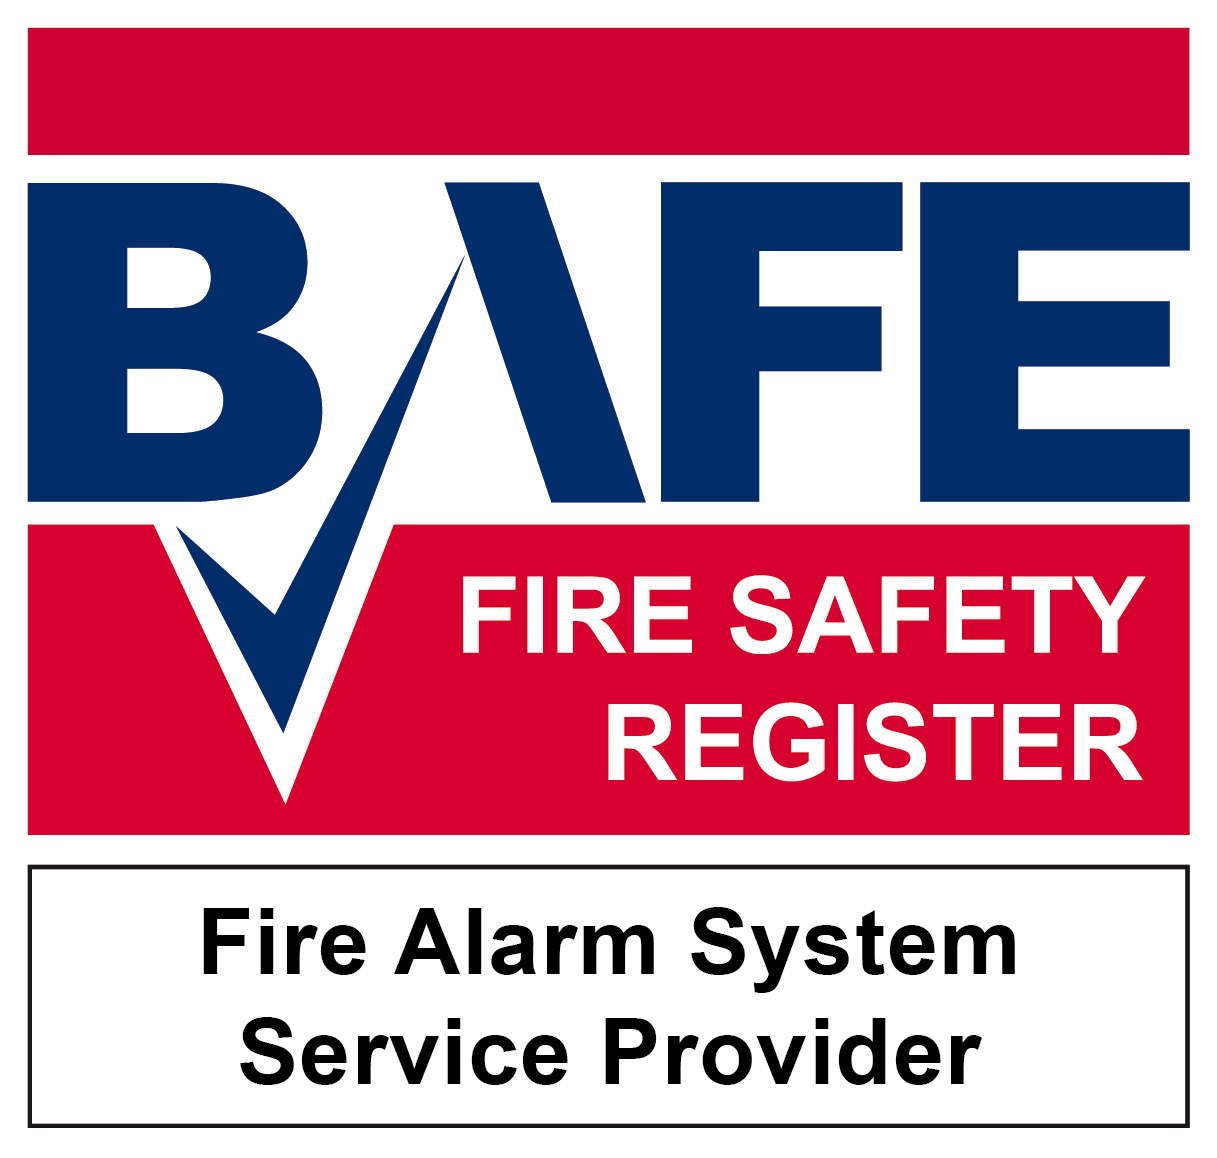 British Approvals for Fire Equipment C&M Fire Alarms